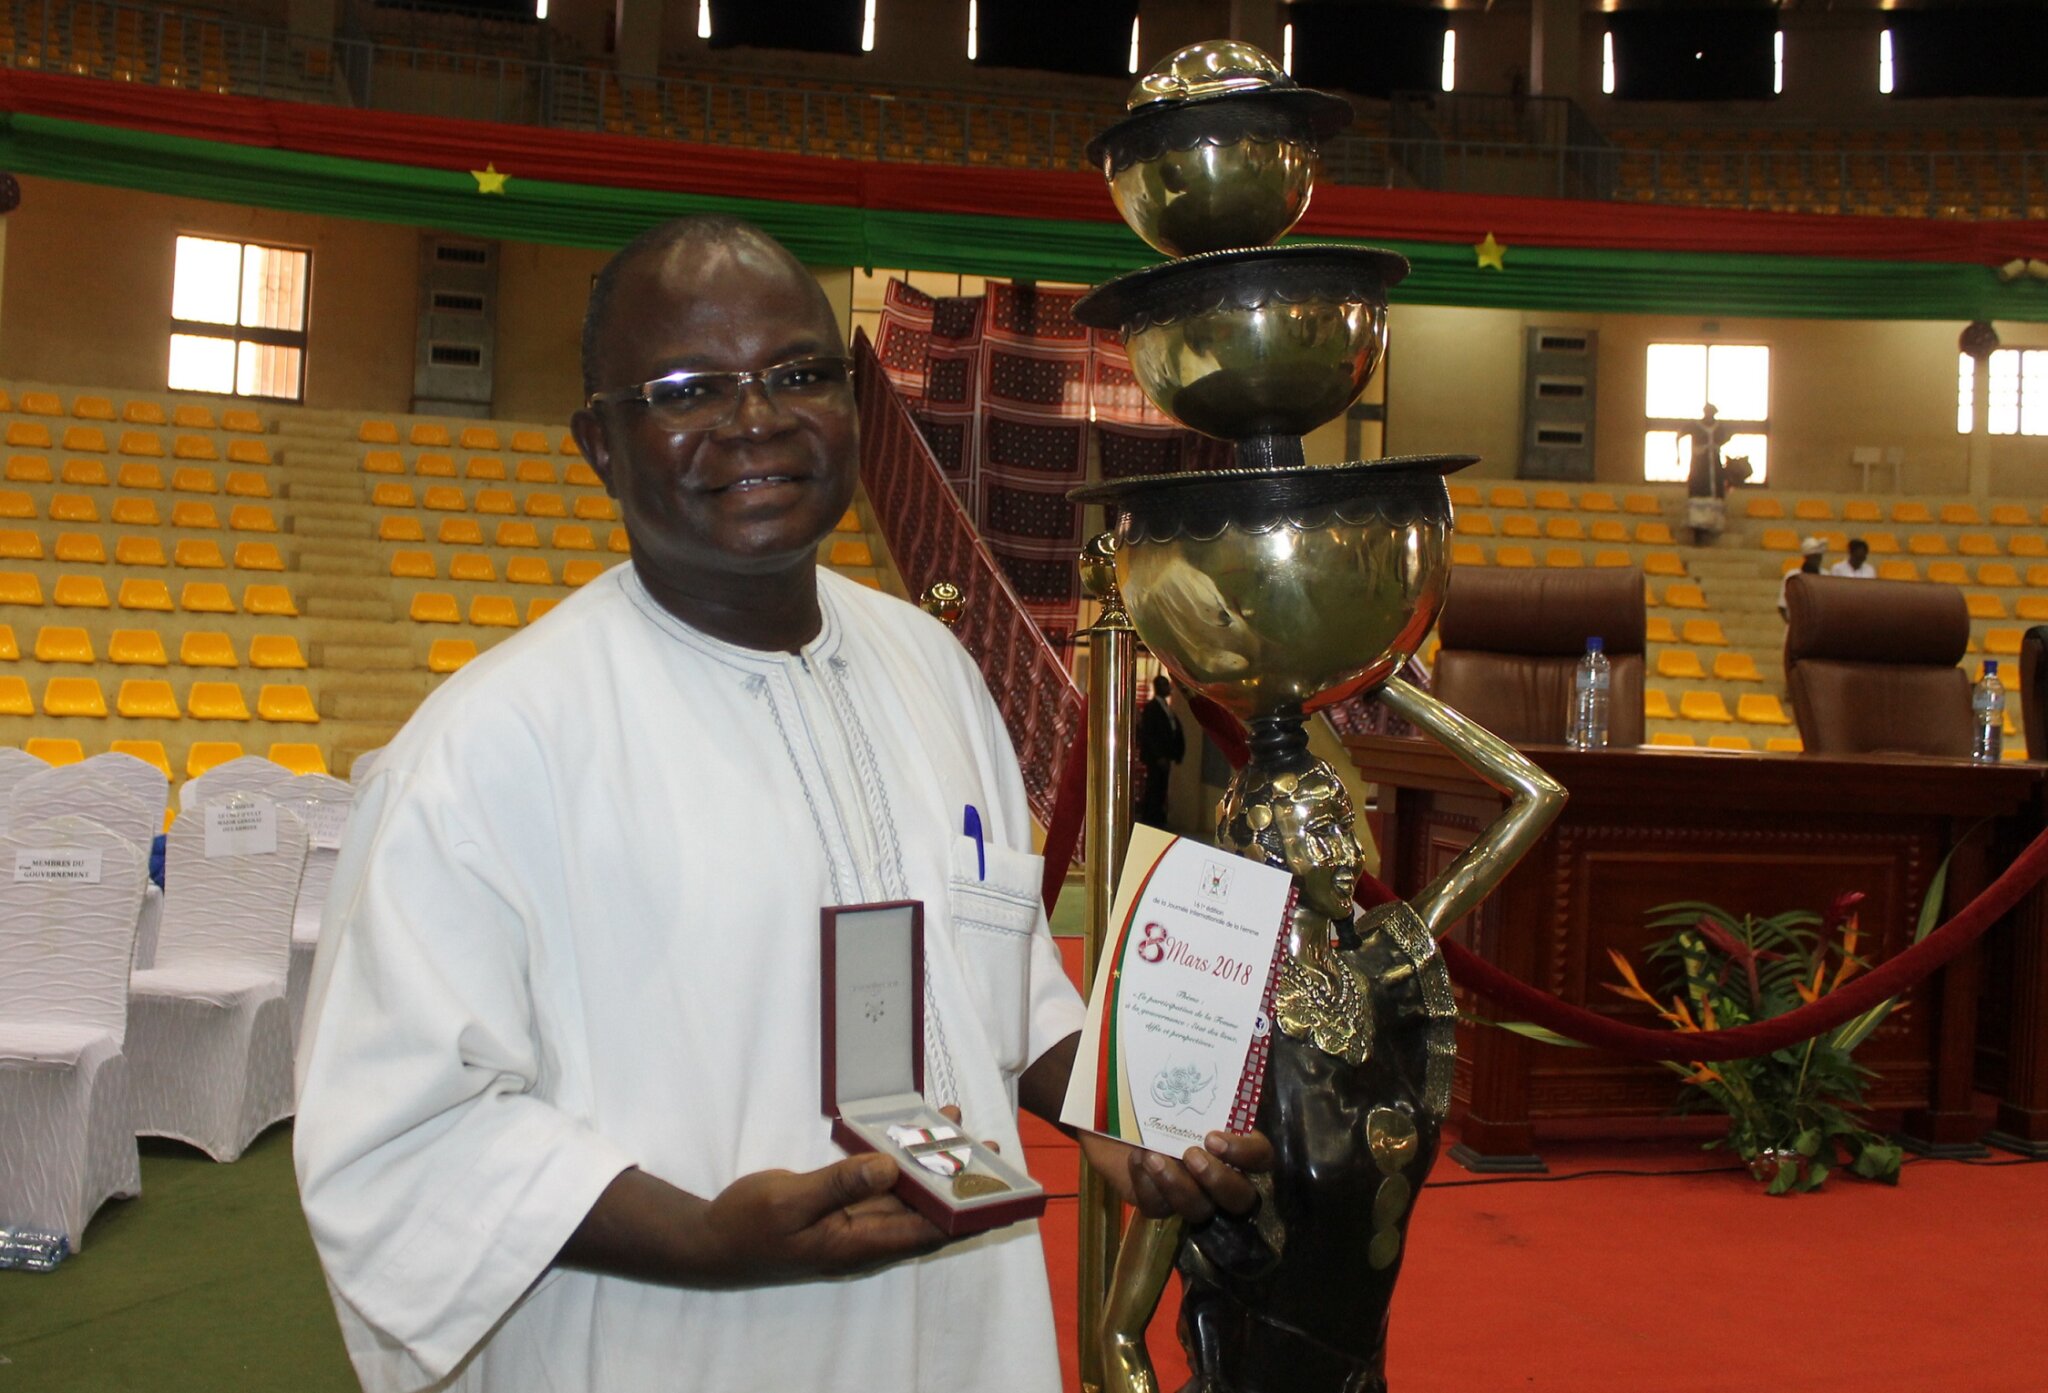 Elie Bagbila a 58-year-old Burkinabe man with glasses and a white traditional shirt stands in an auditorium holding a medal of distinction. next to him is a bronze sculpture taller than him.